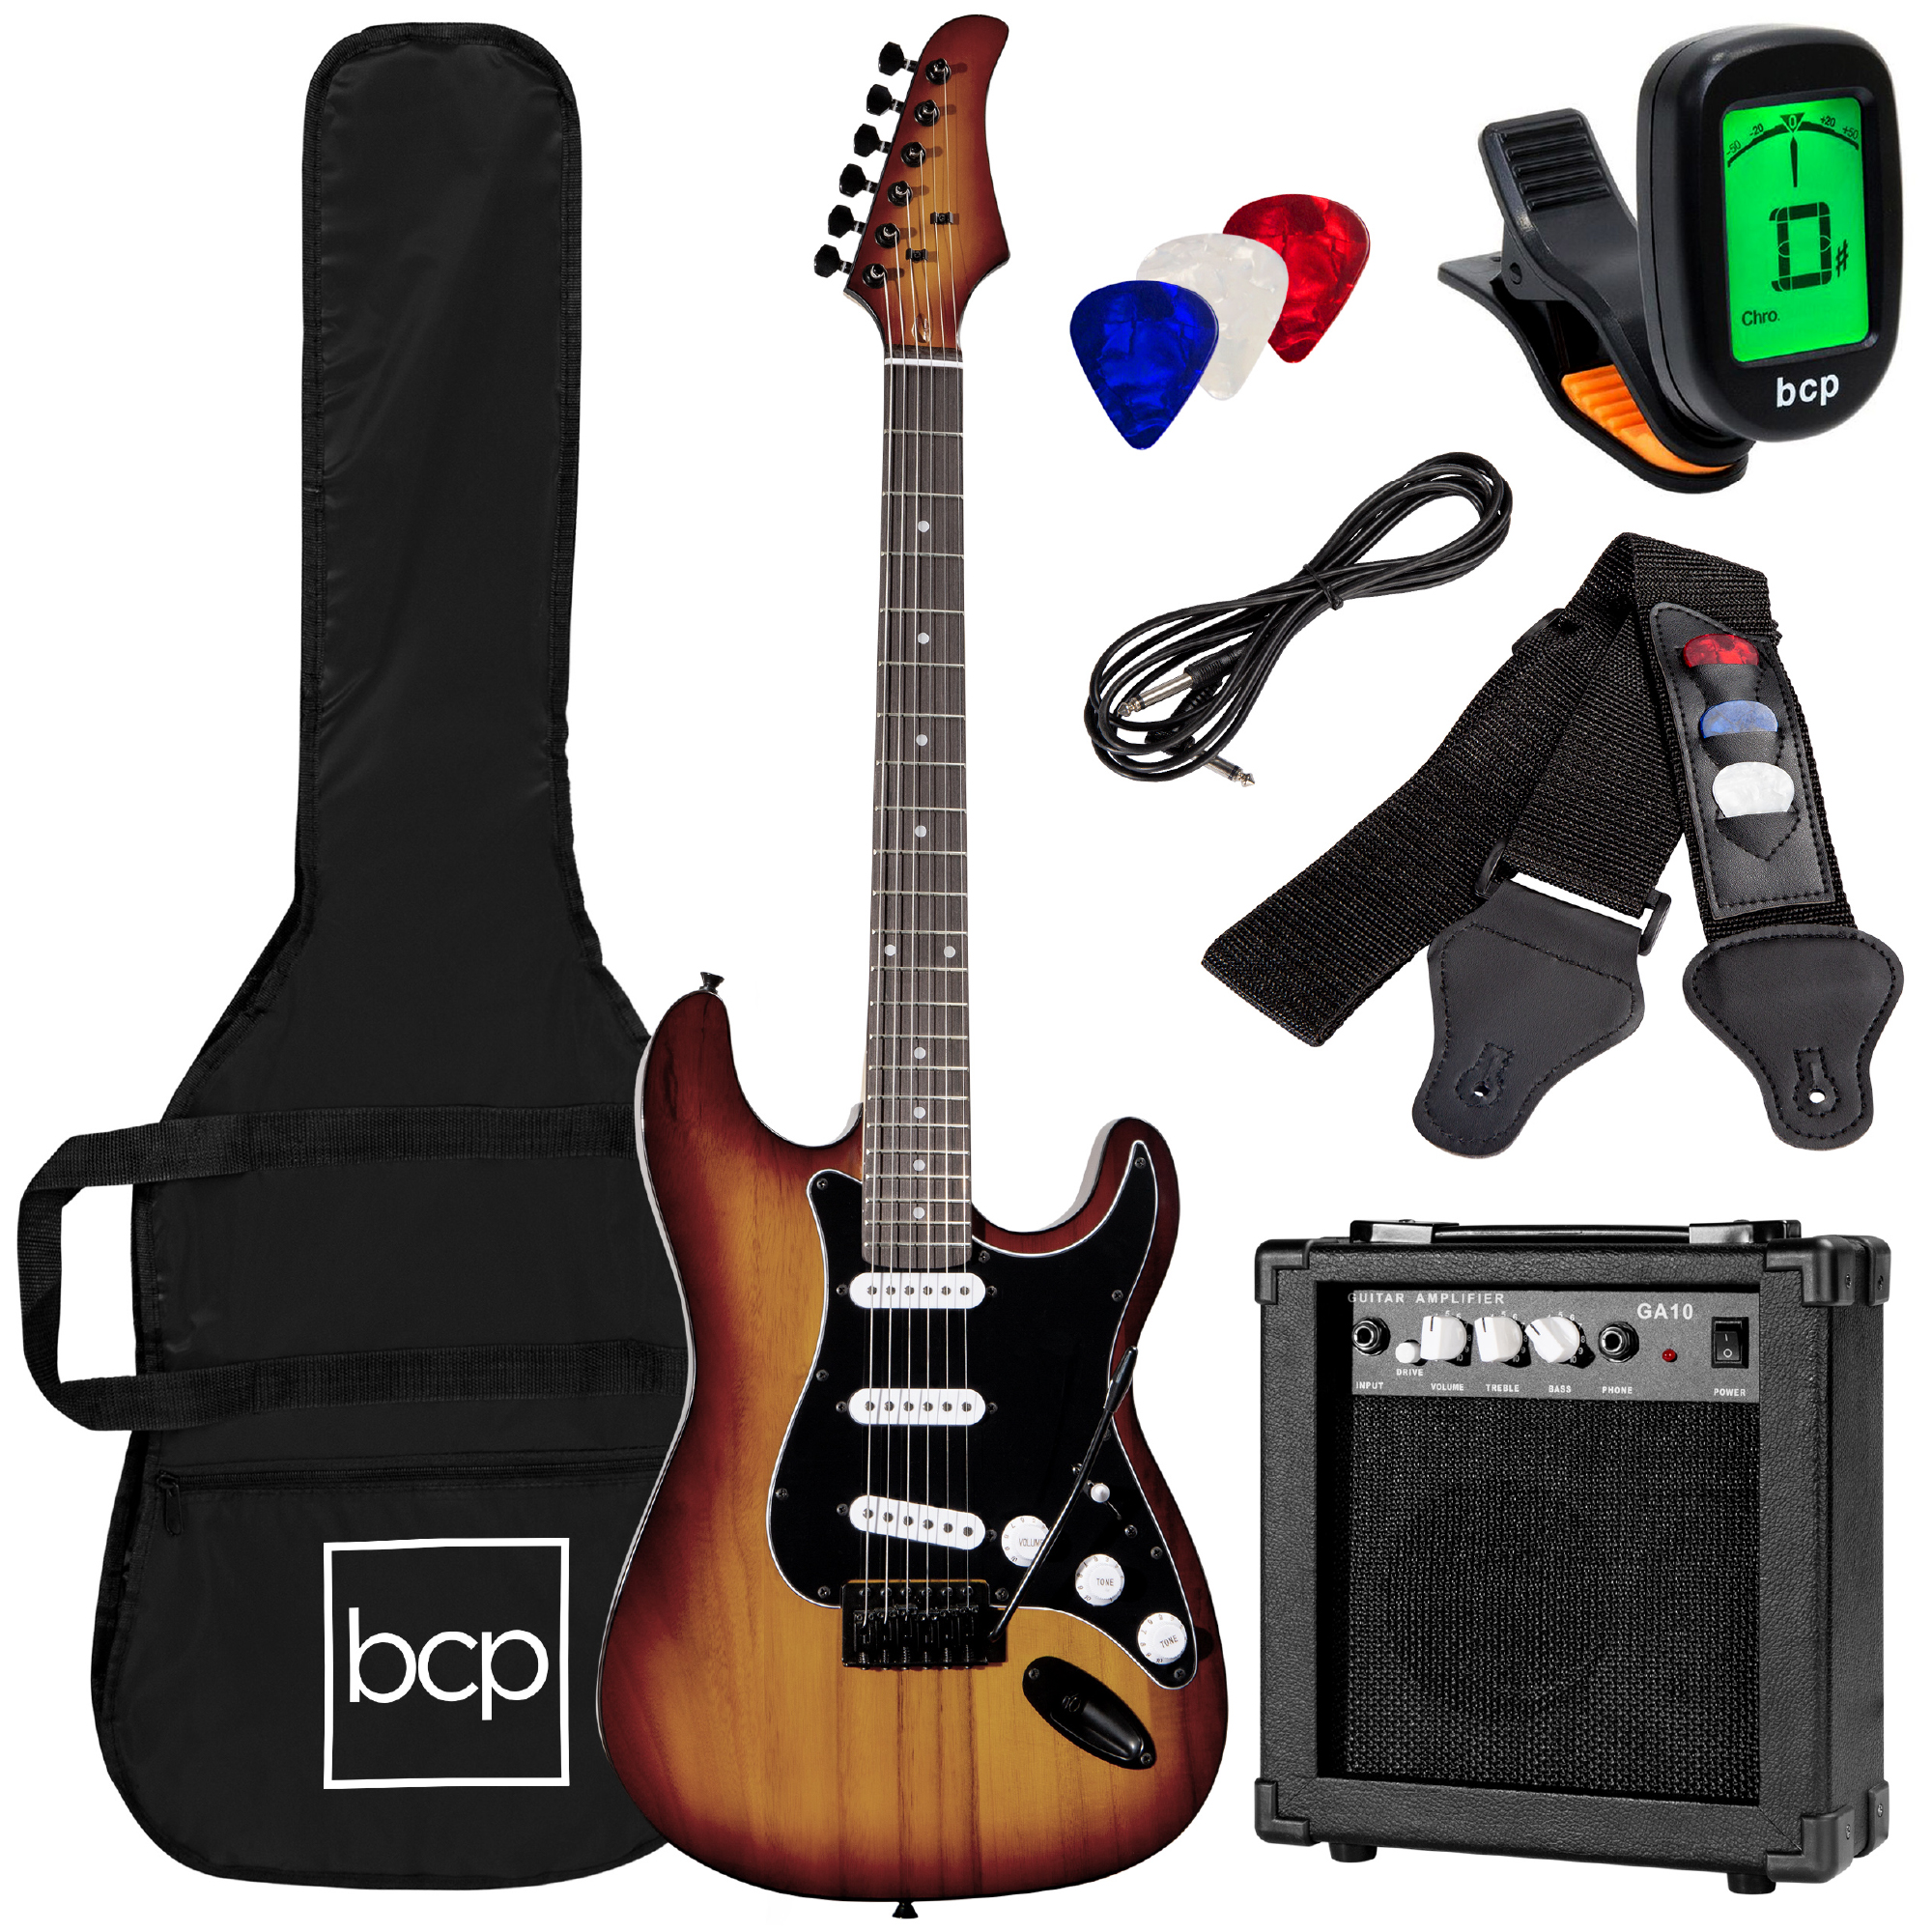 Best Choice Products 39in Full Size Beginner Electric Guitar Kit with Case, Strap, Amp, Whammy Bar - Bourbon - image 1 of 6